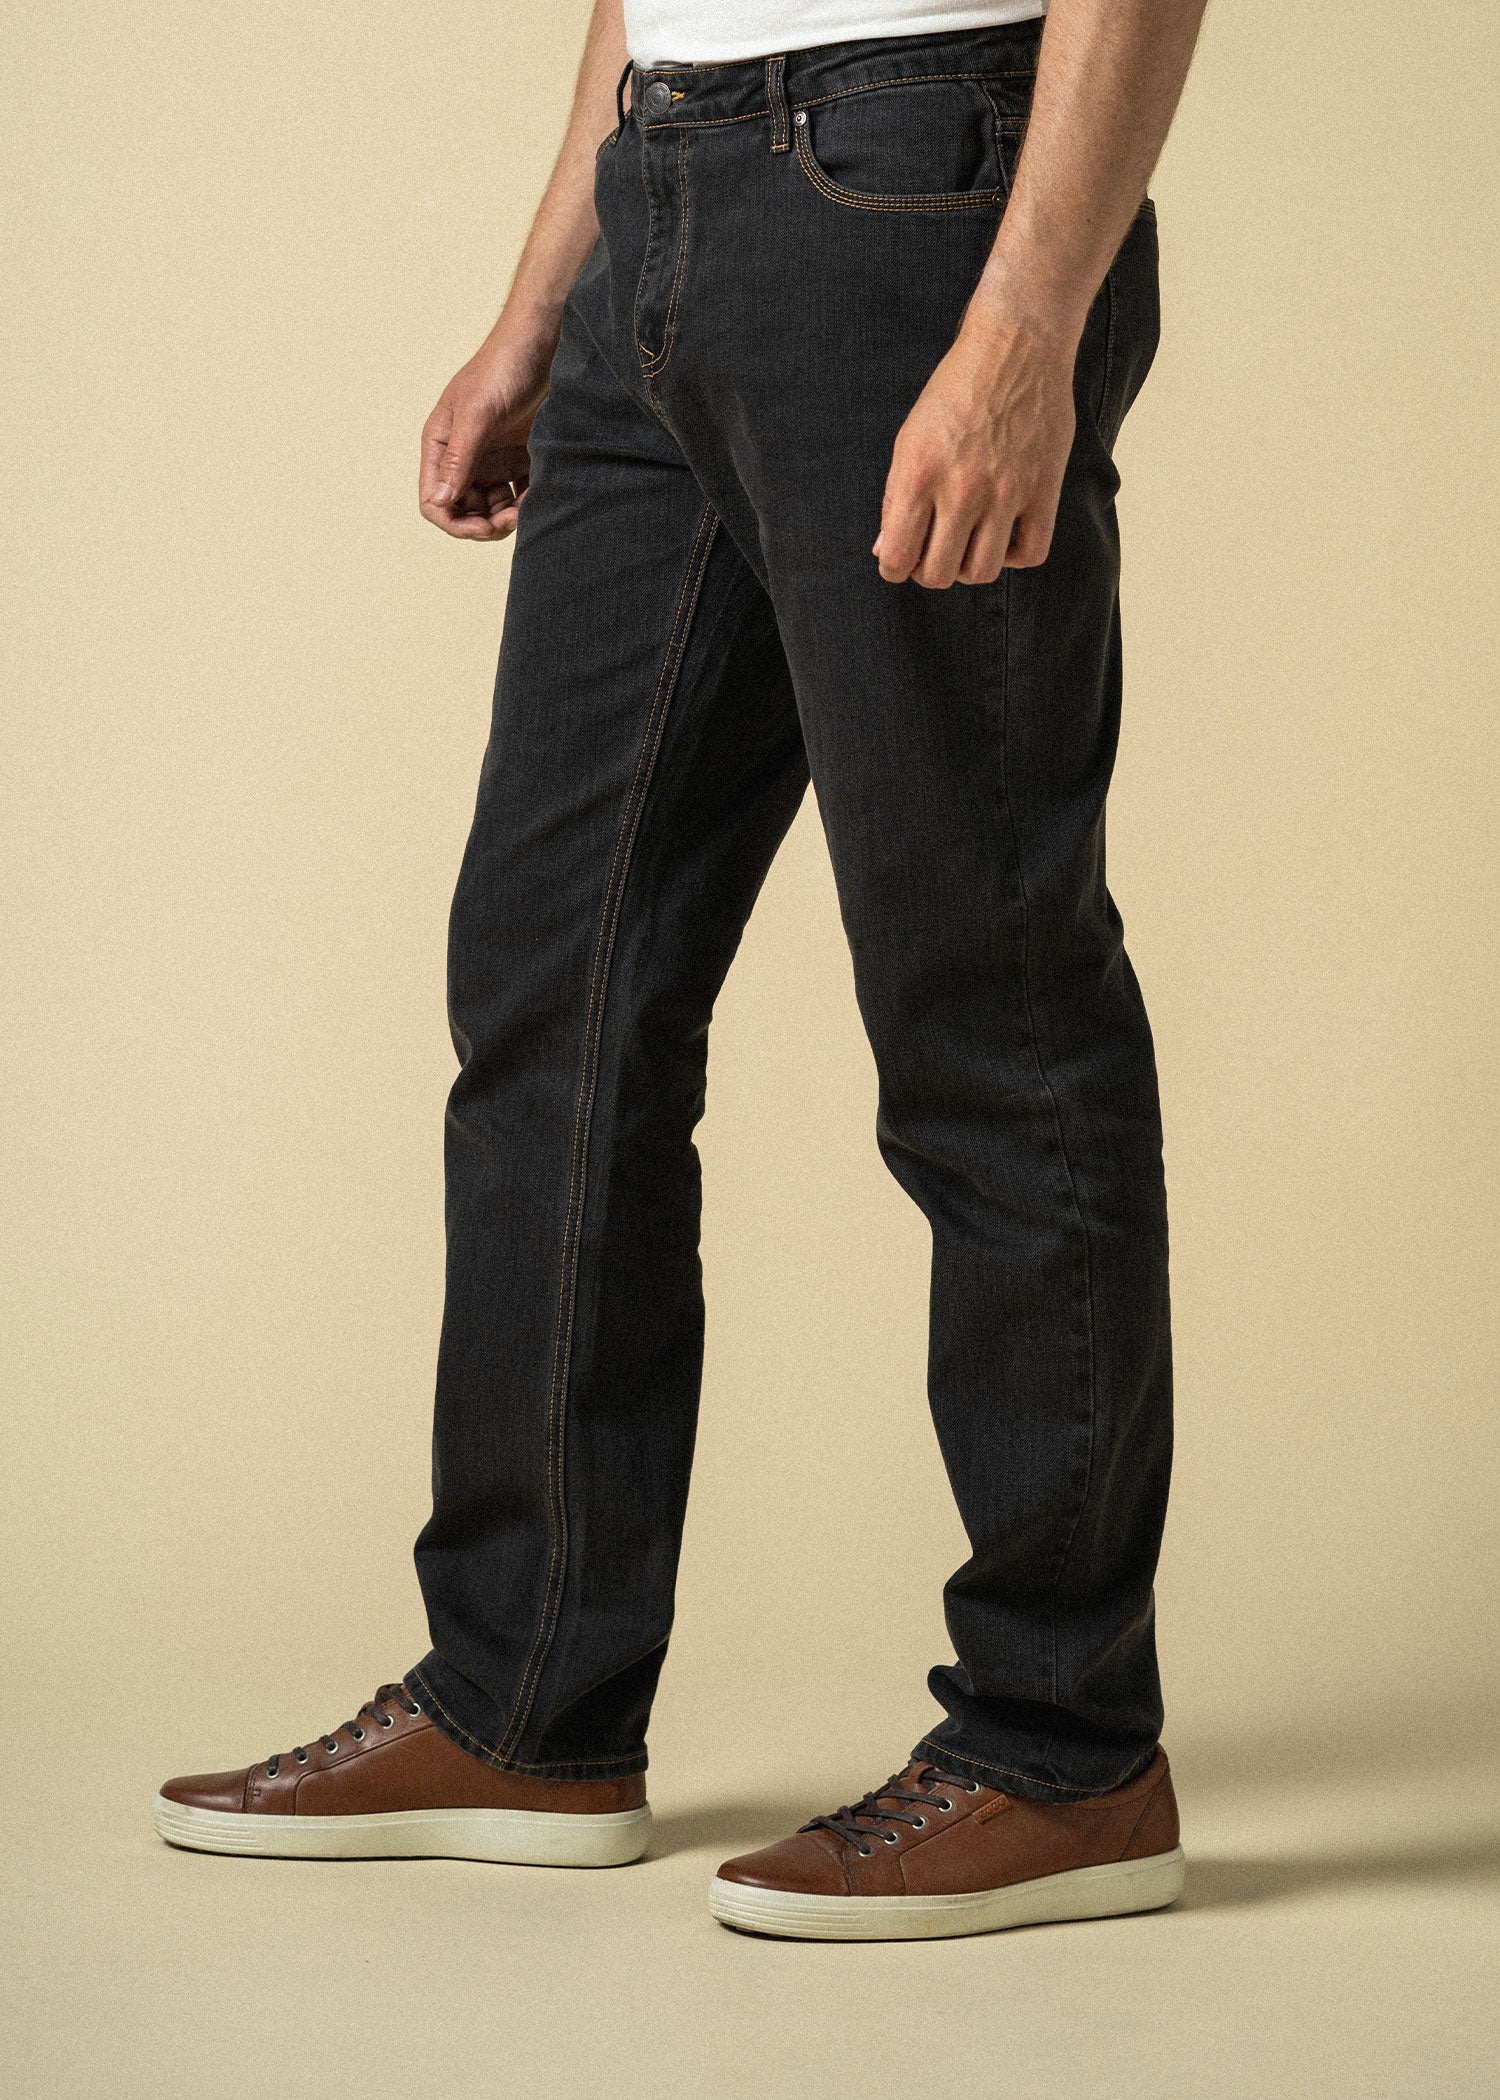 STANDARD STRAIGHT Vintage Black Tall Men's Jeans | Longjohn and Sons – AND